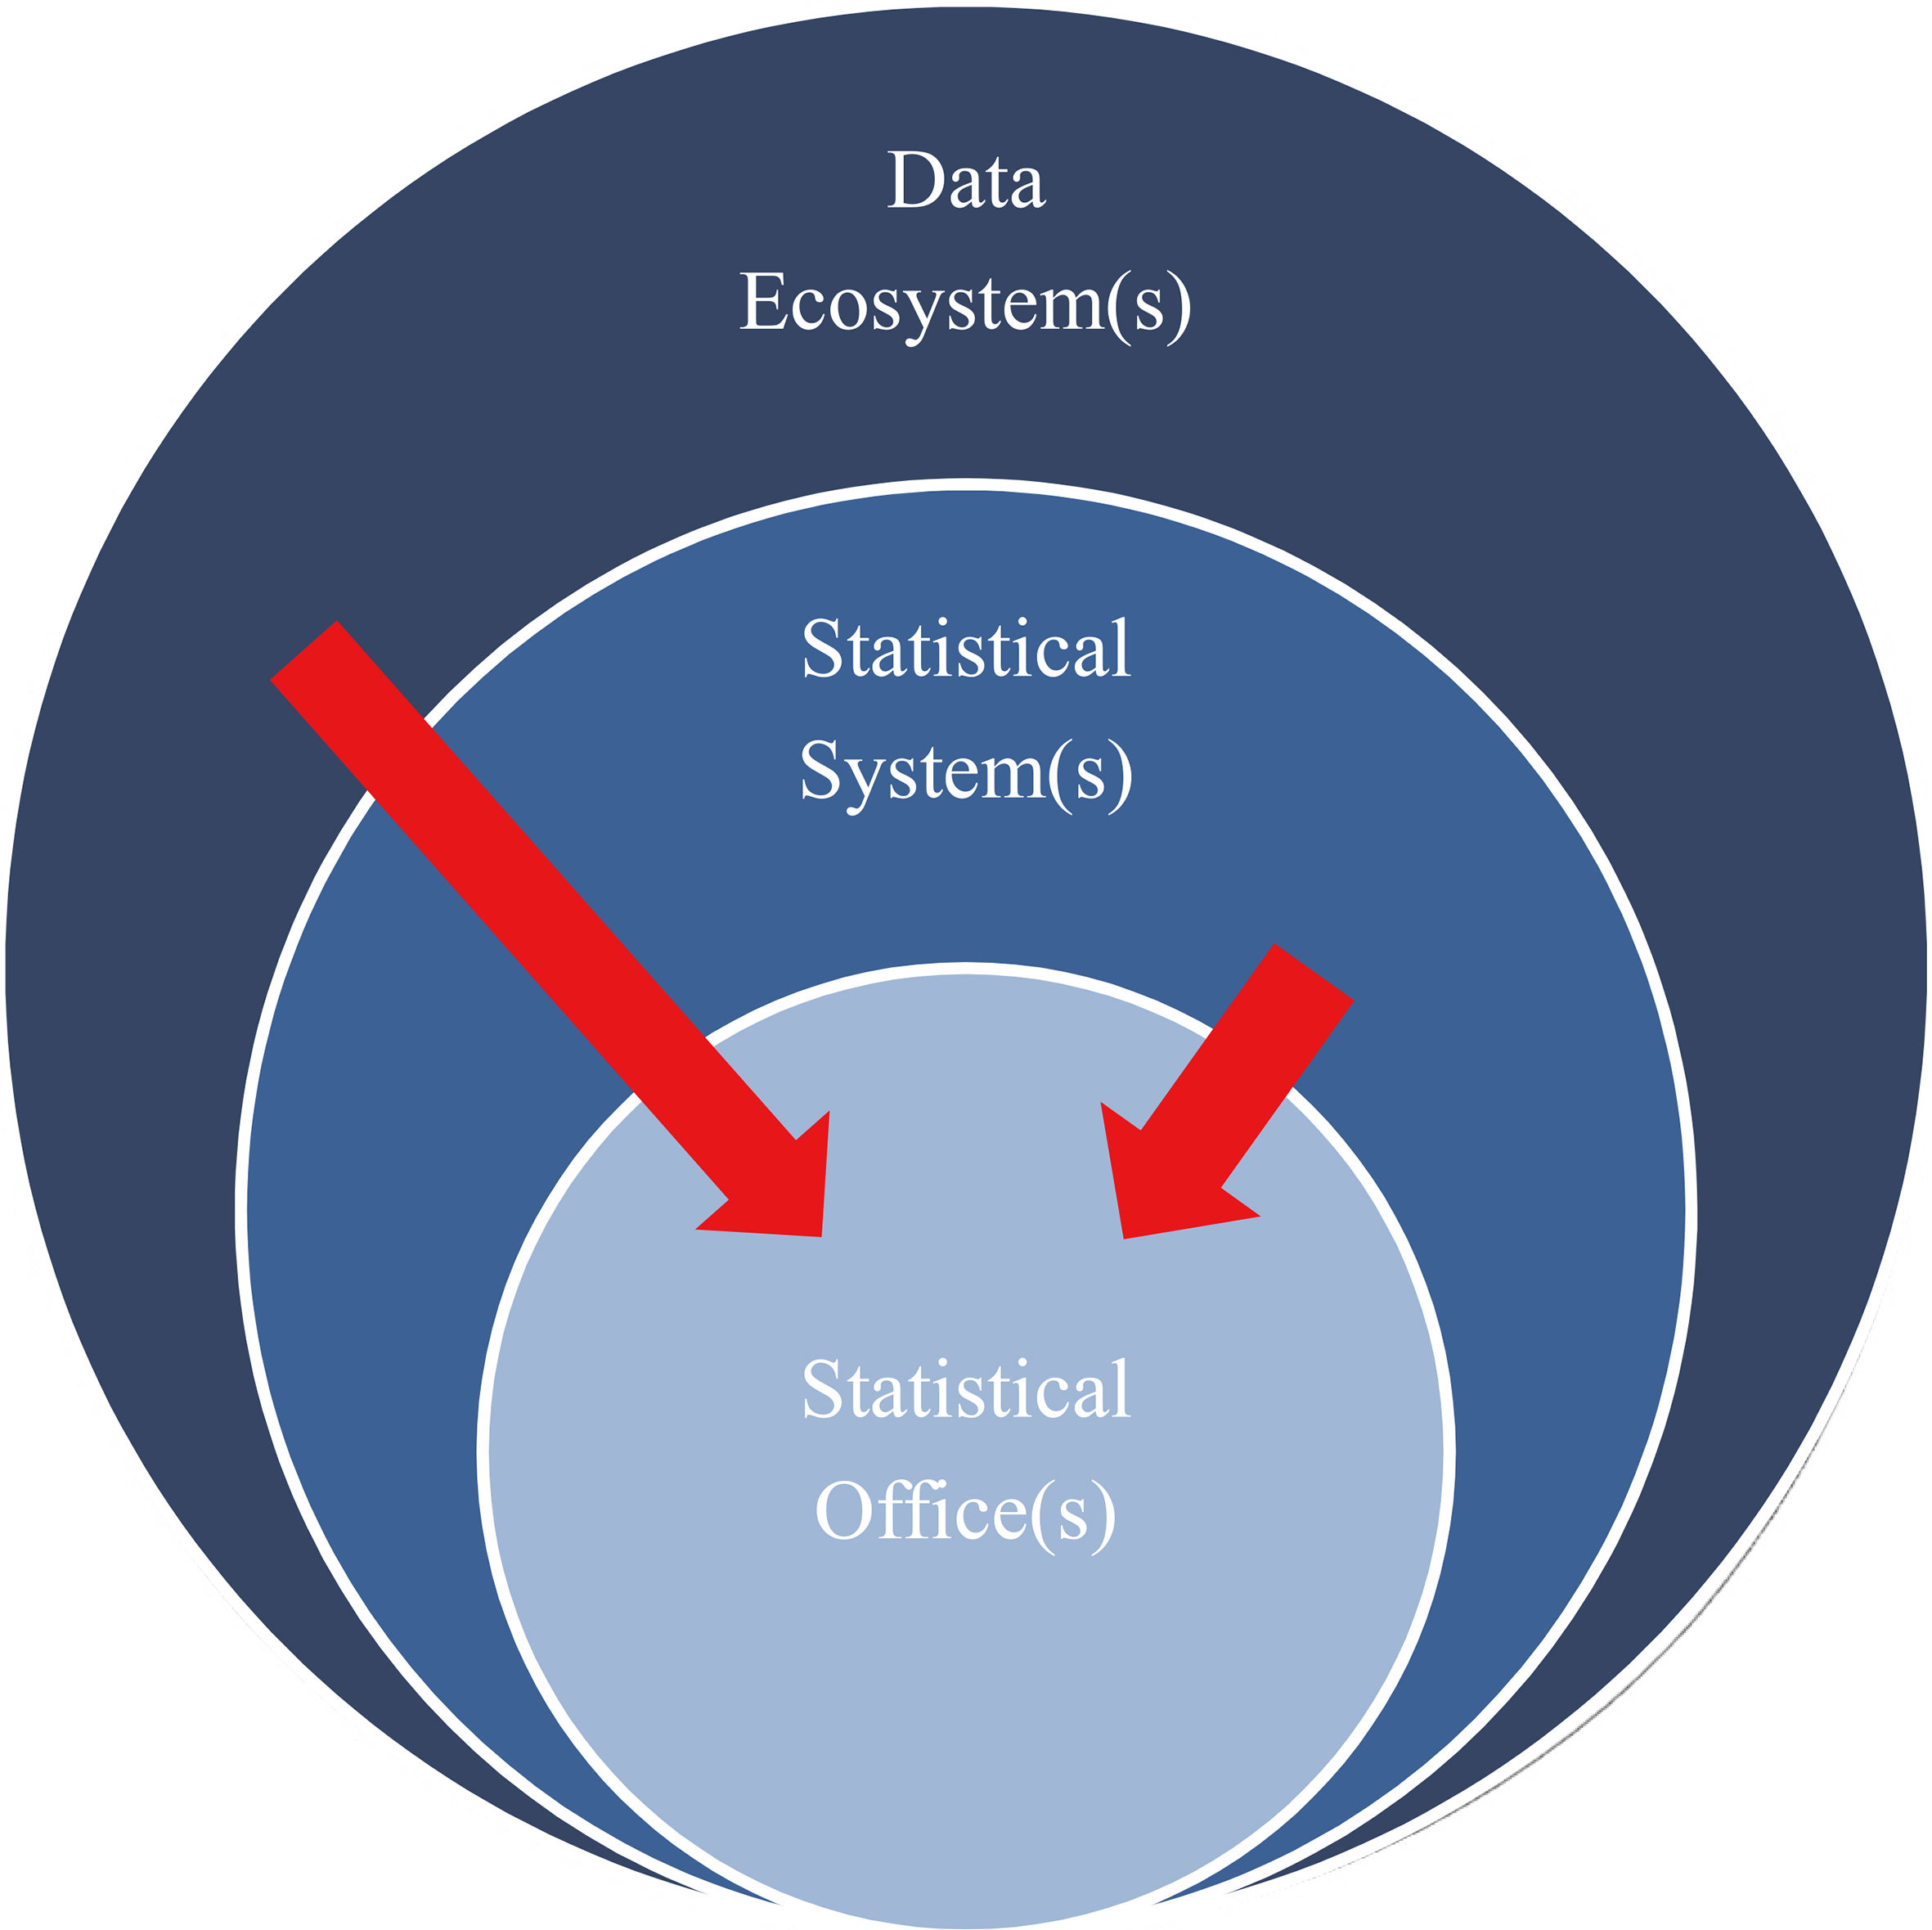 (National/Global) statistical and data ecosystems.